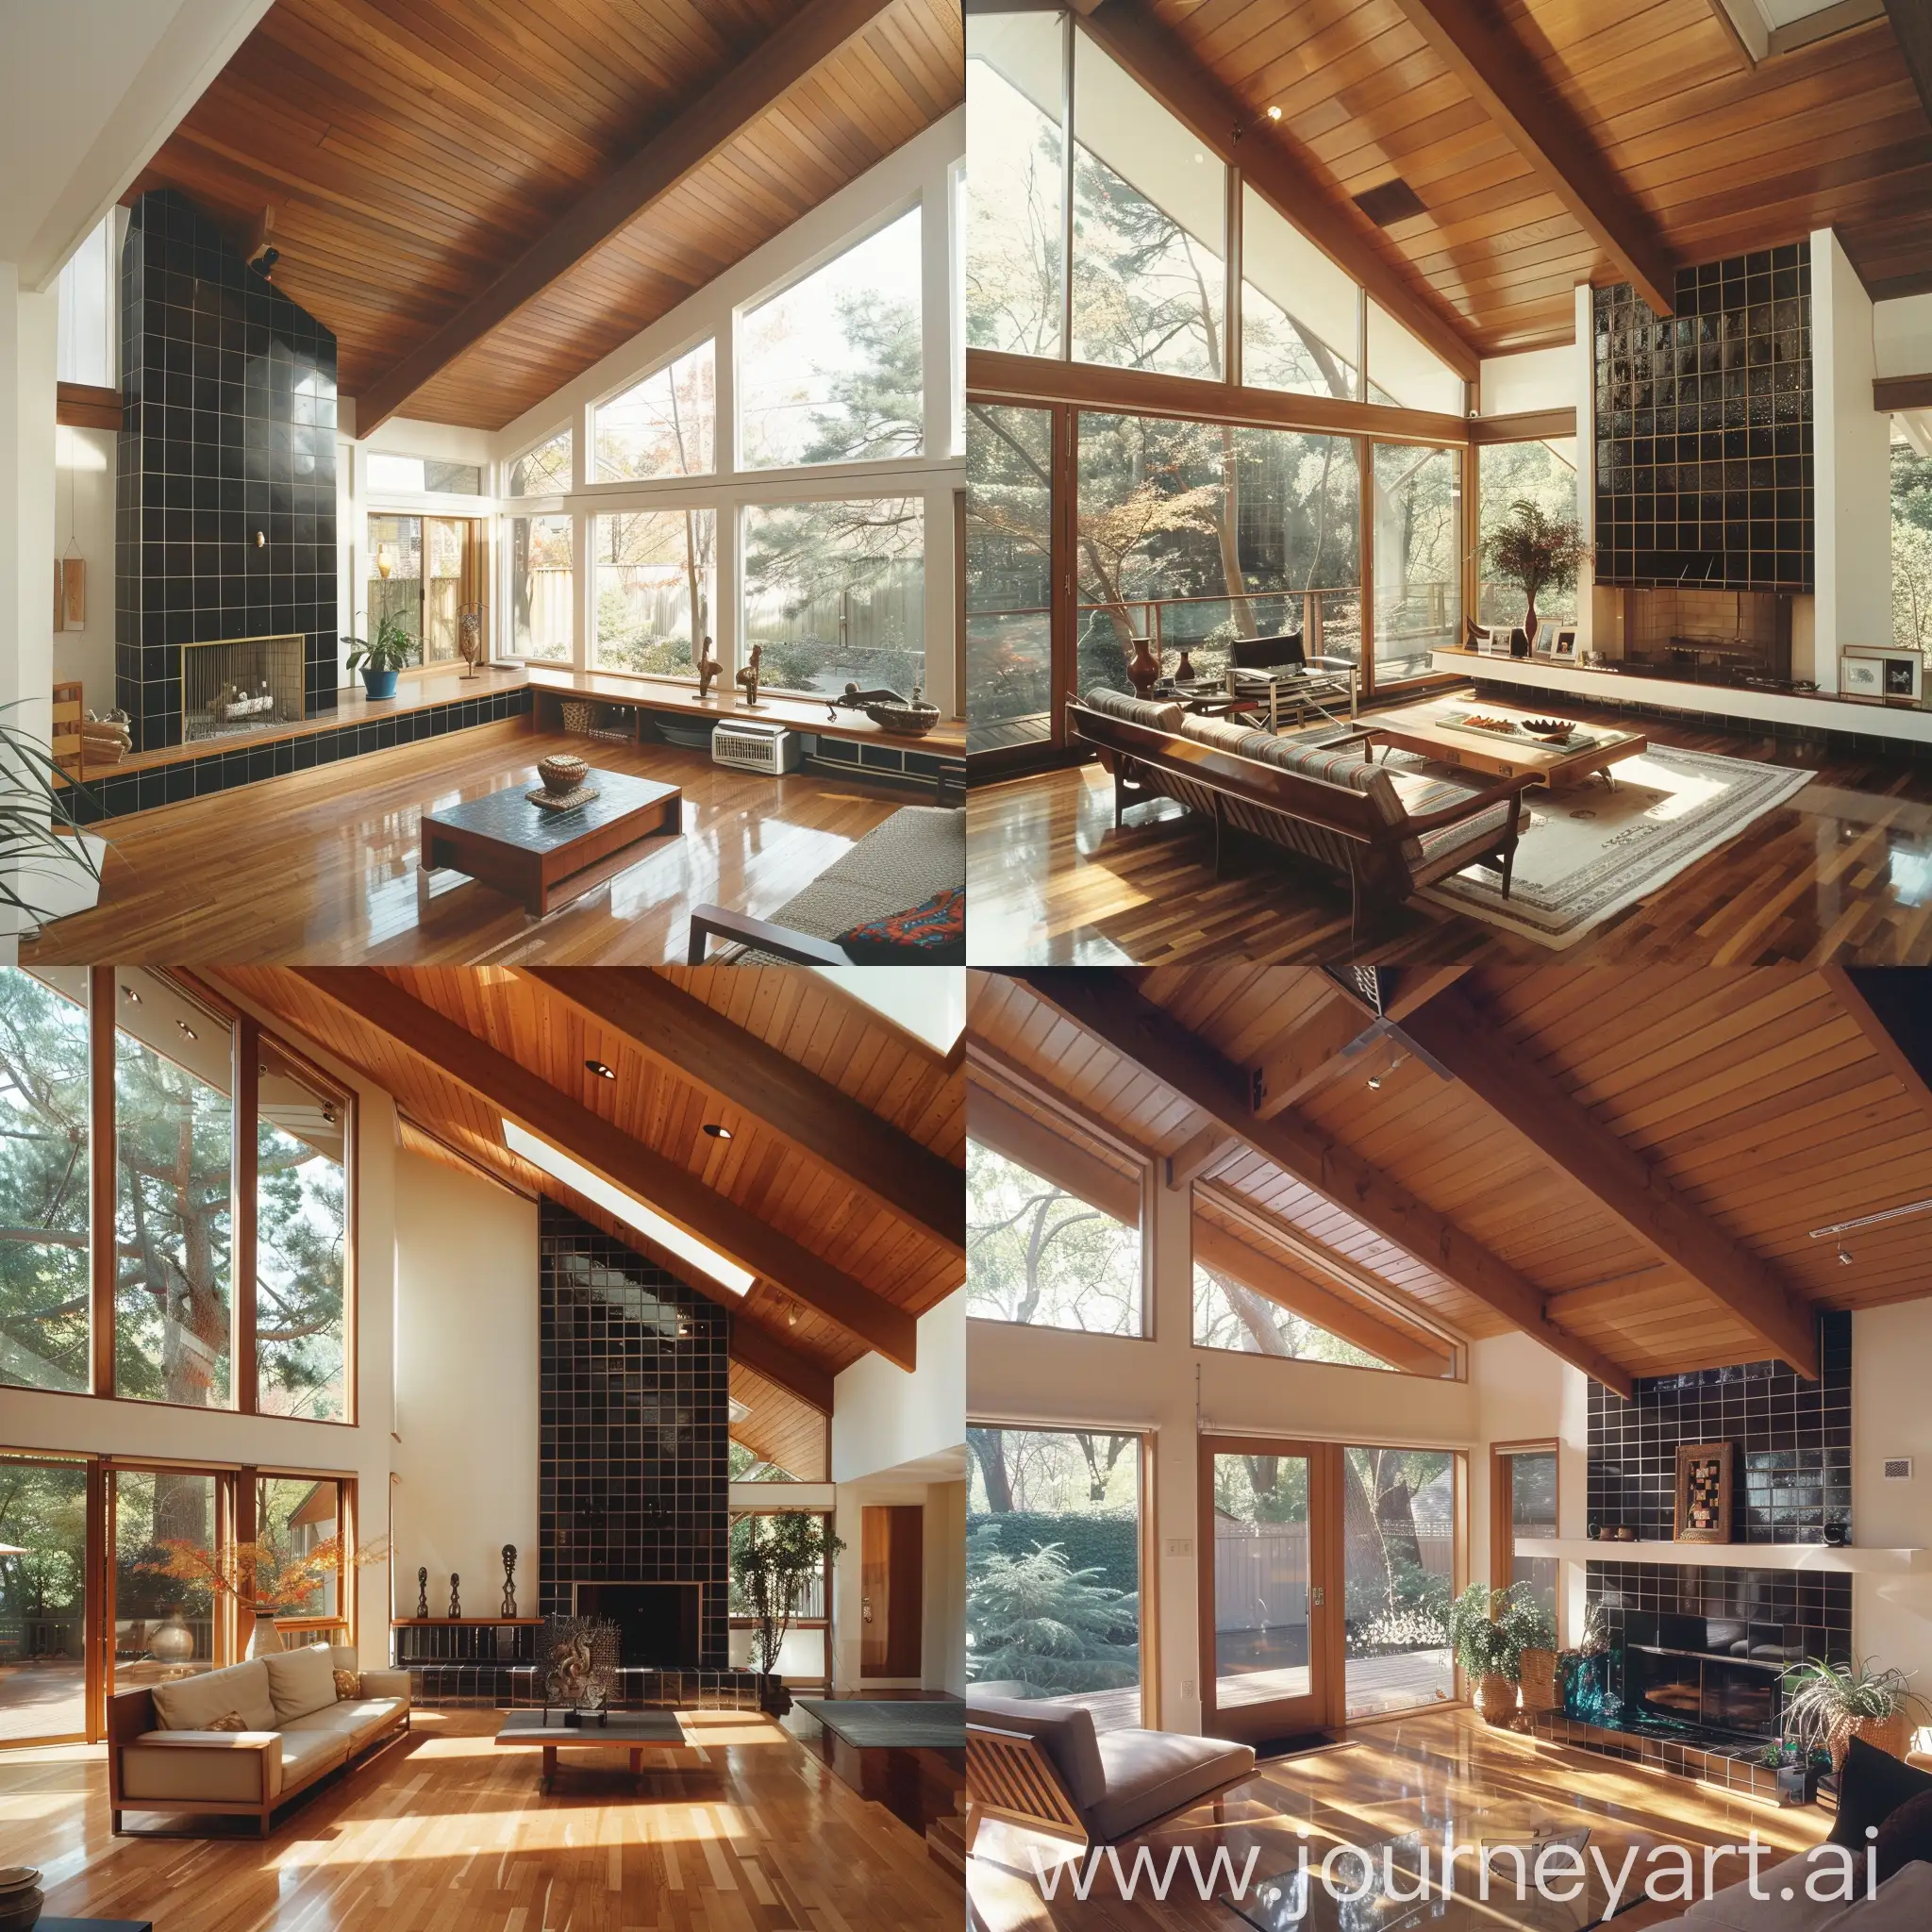 Midcentury-Modern-Living-Room-with-Japandi-Style-Fireplace-and-Tall-Glass-Windows